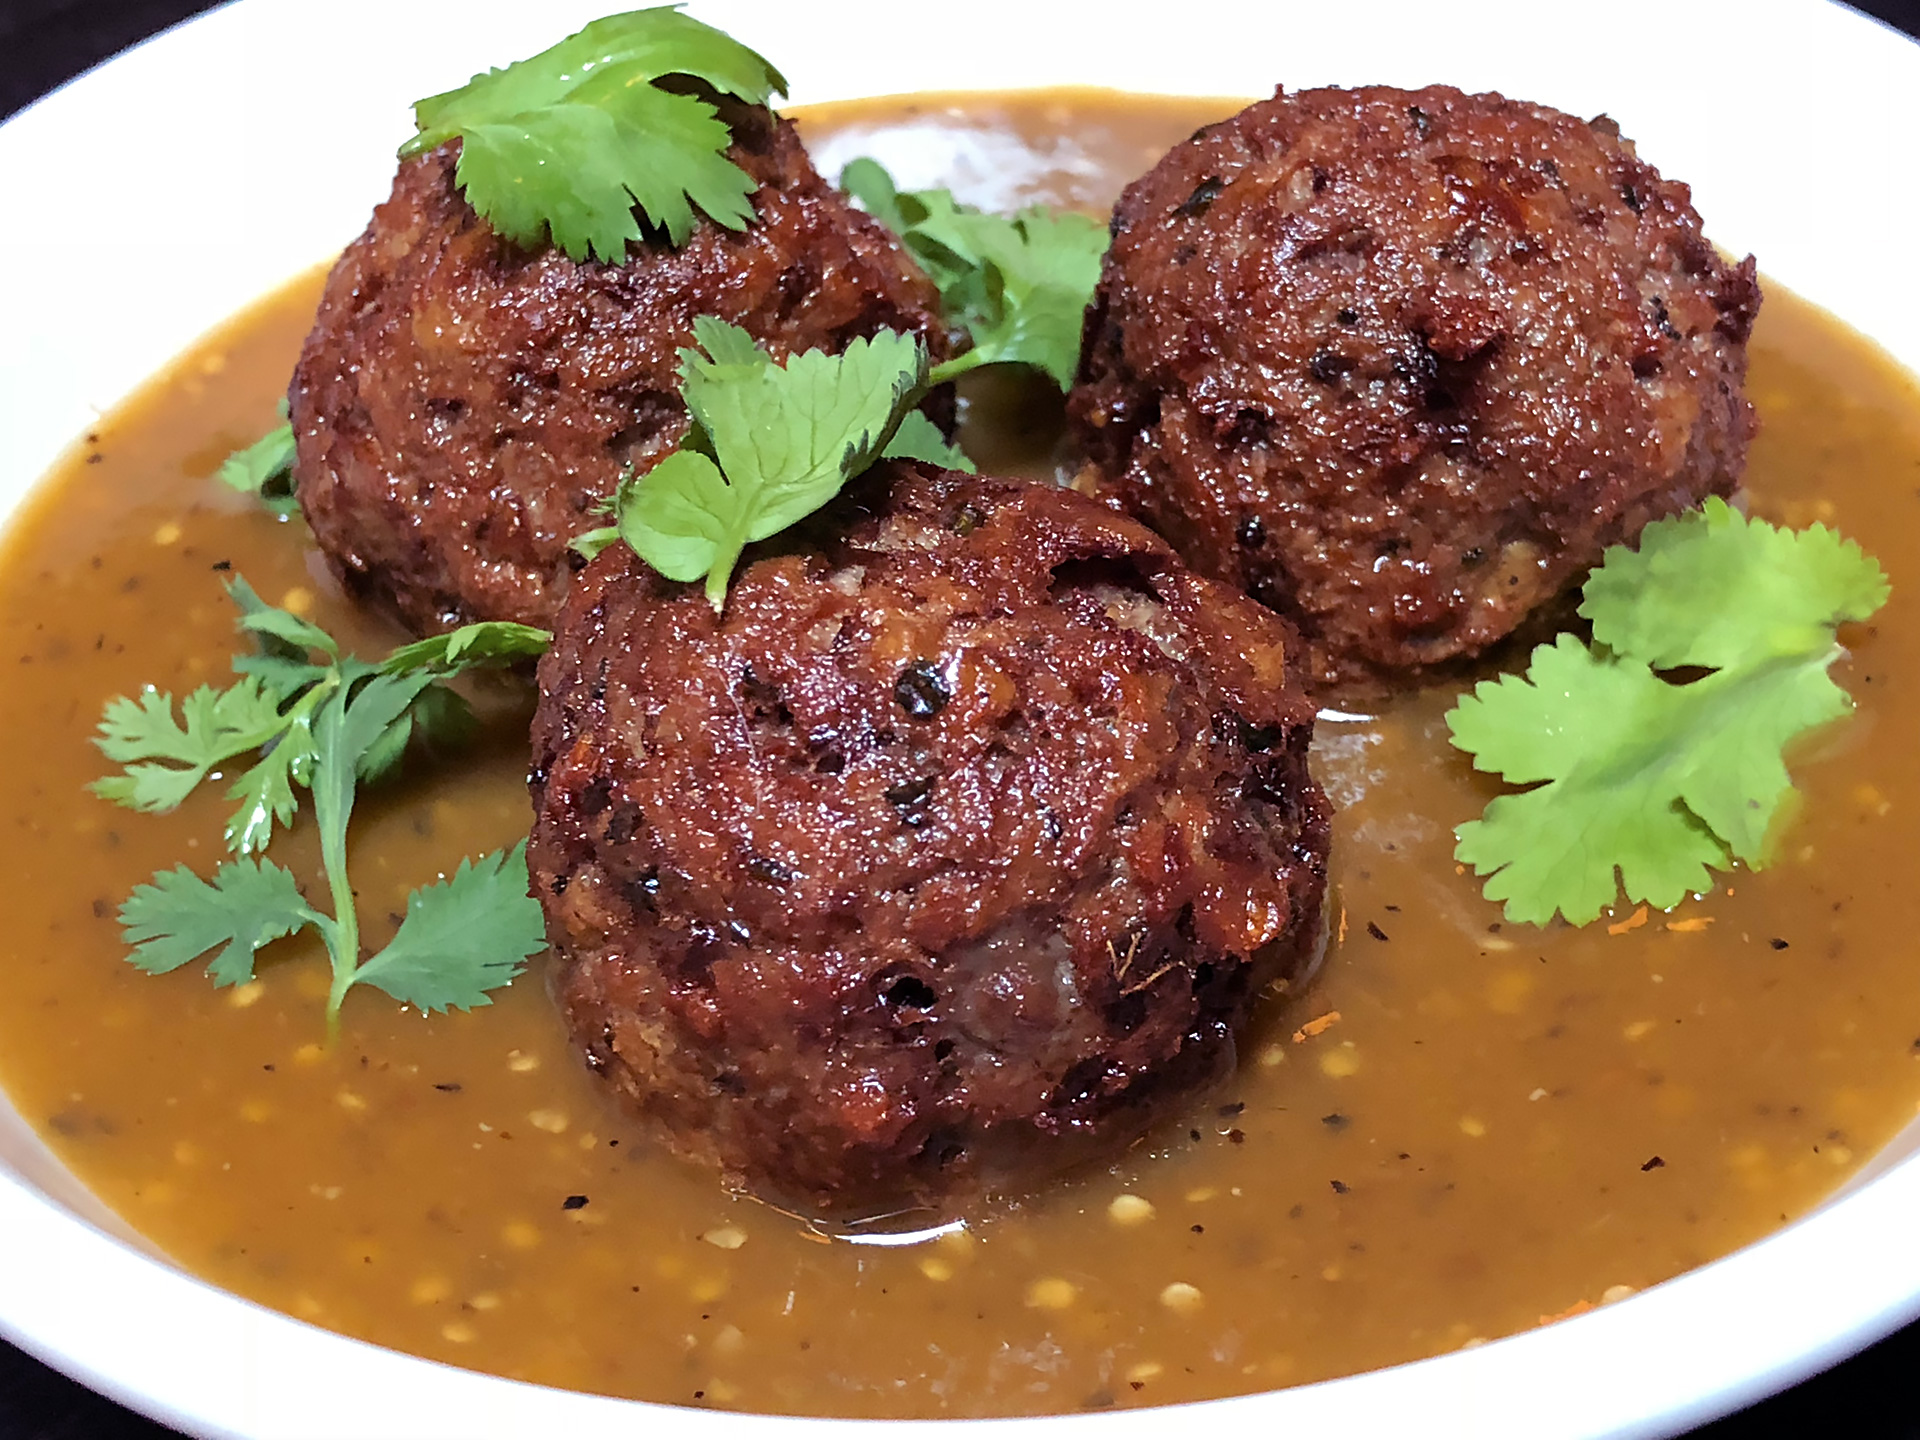 Meat-free Impossible meatball